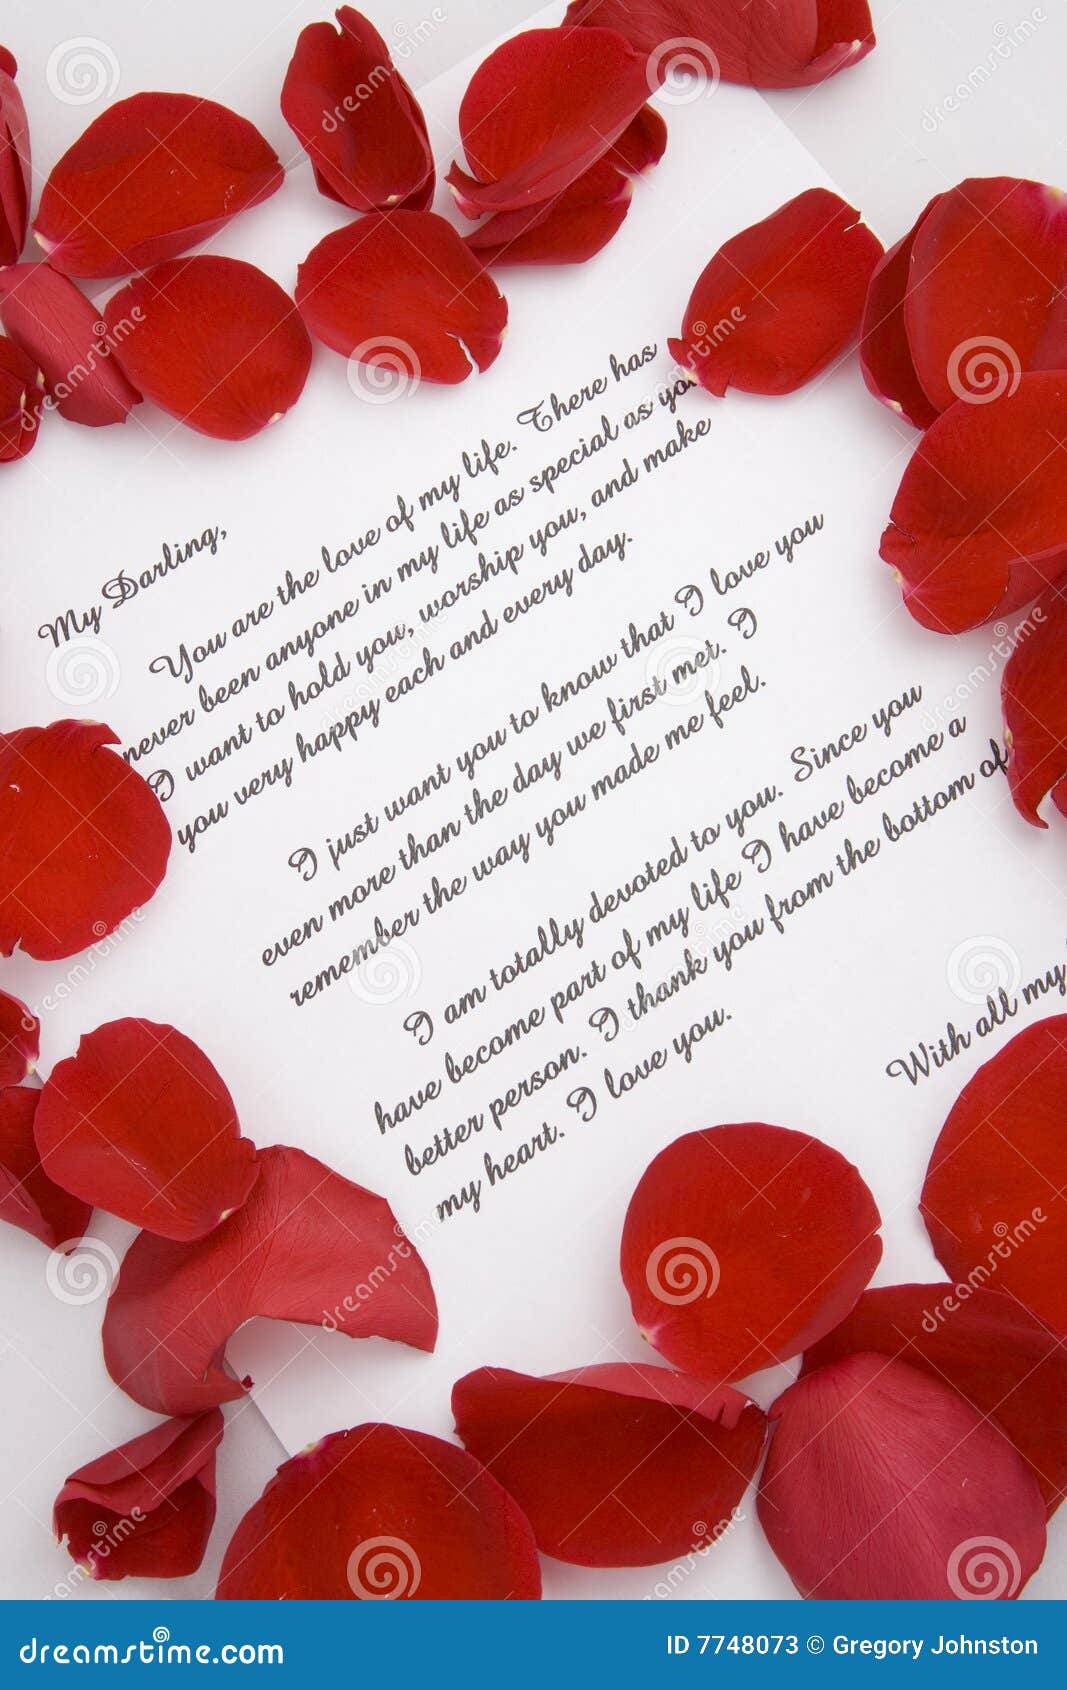 A Love Letter for Valentines Day. Stock Image - Image of rose ...